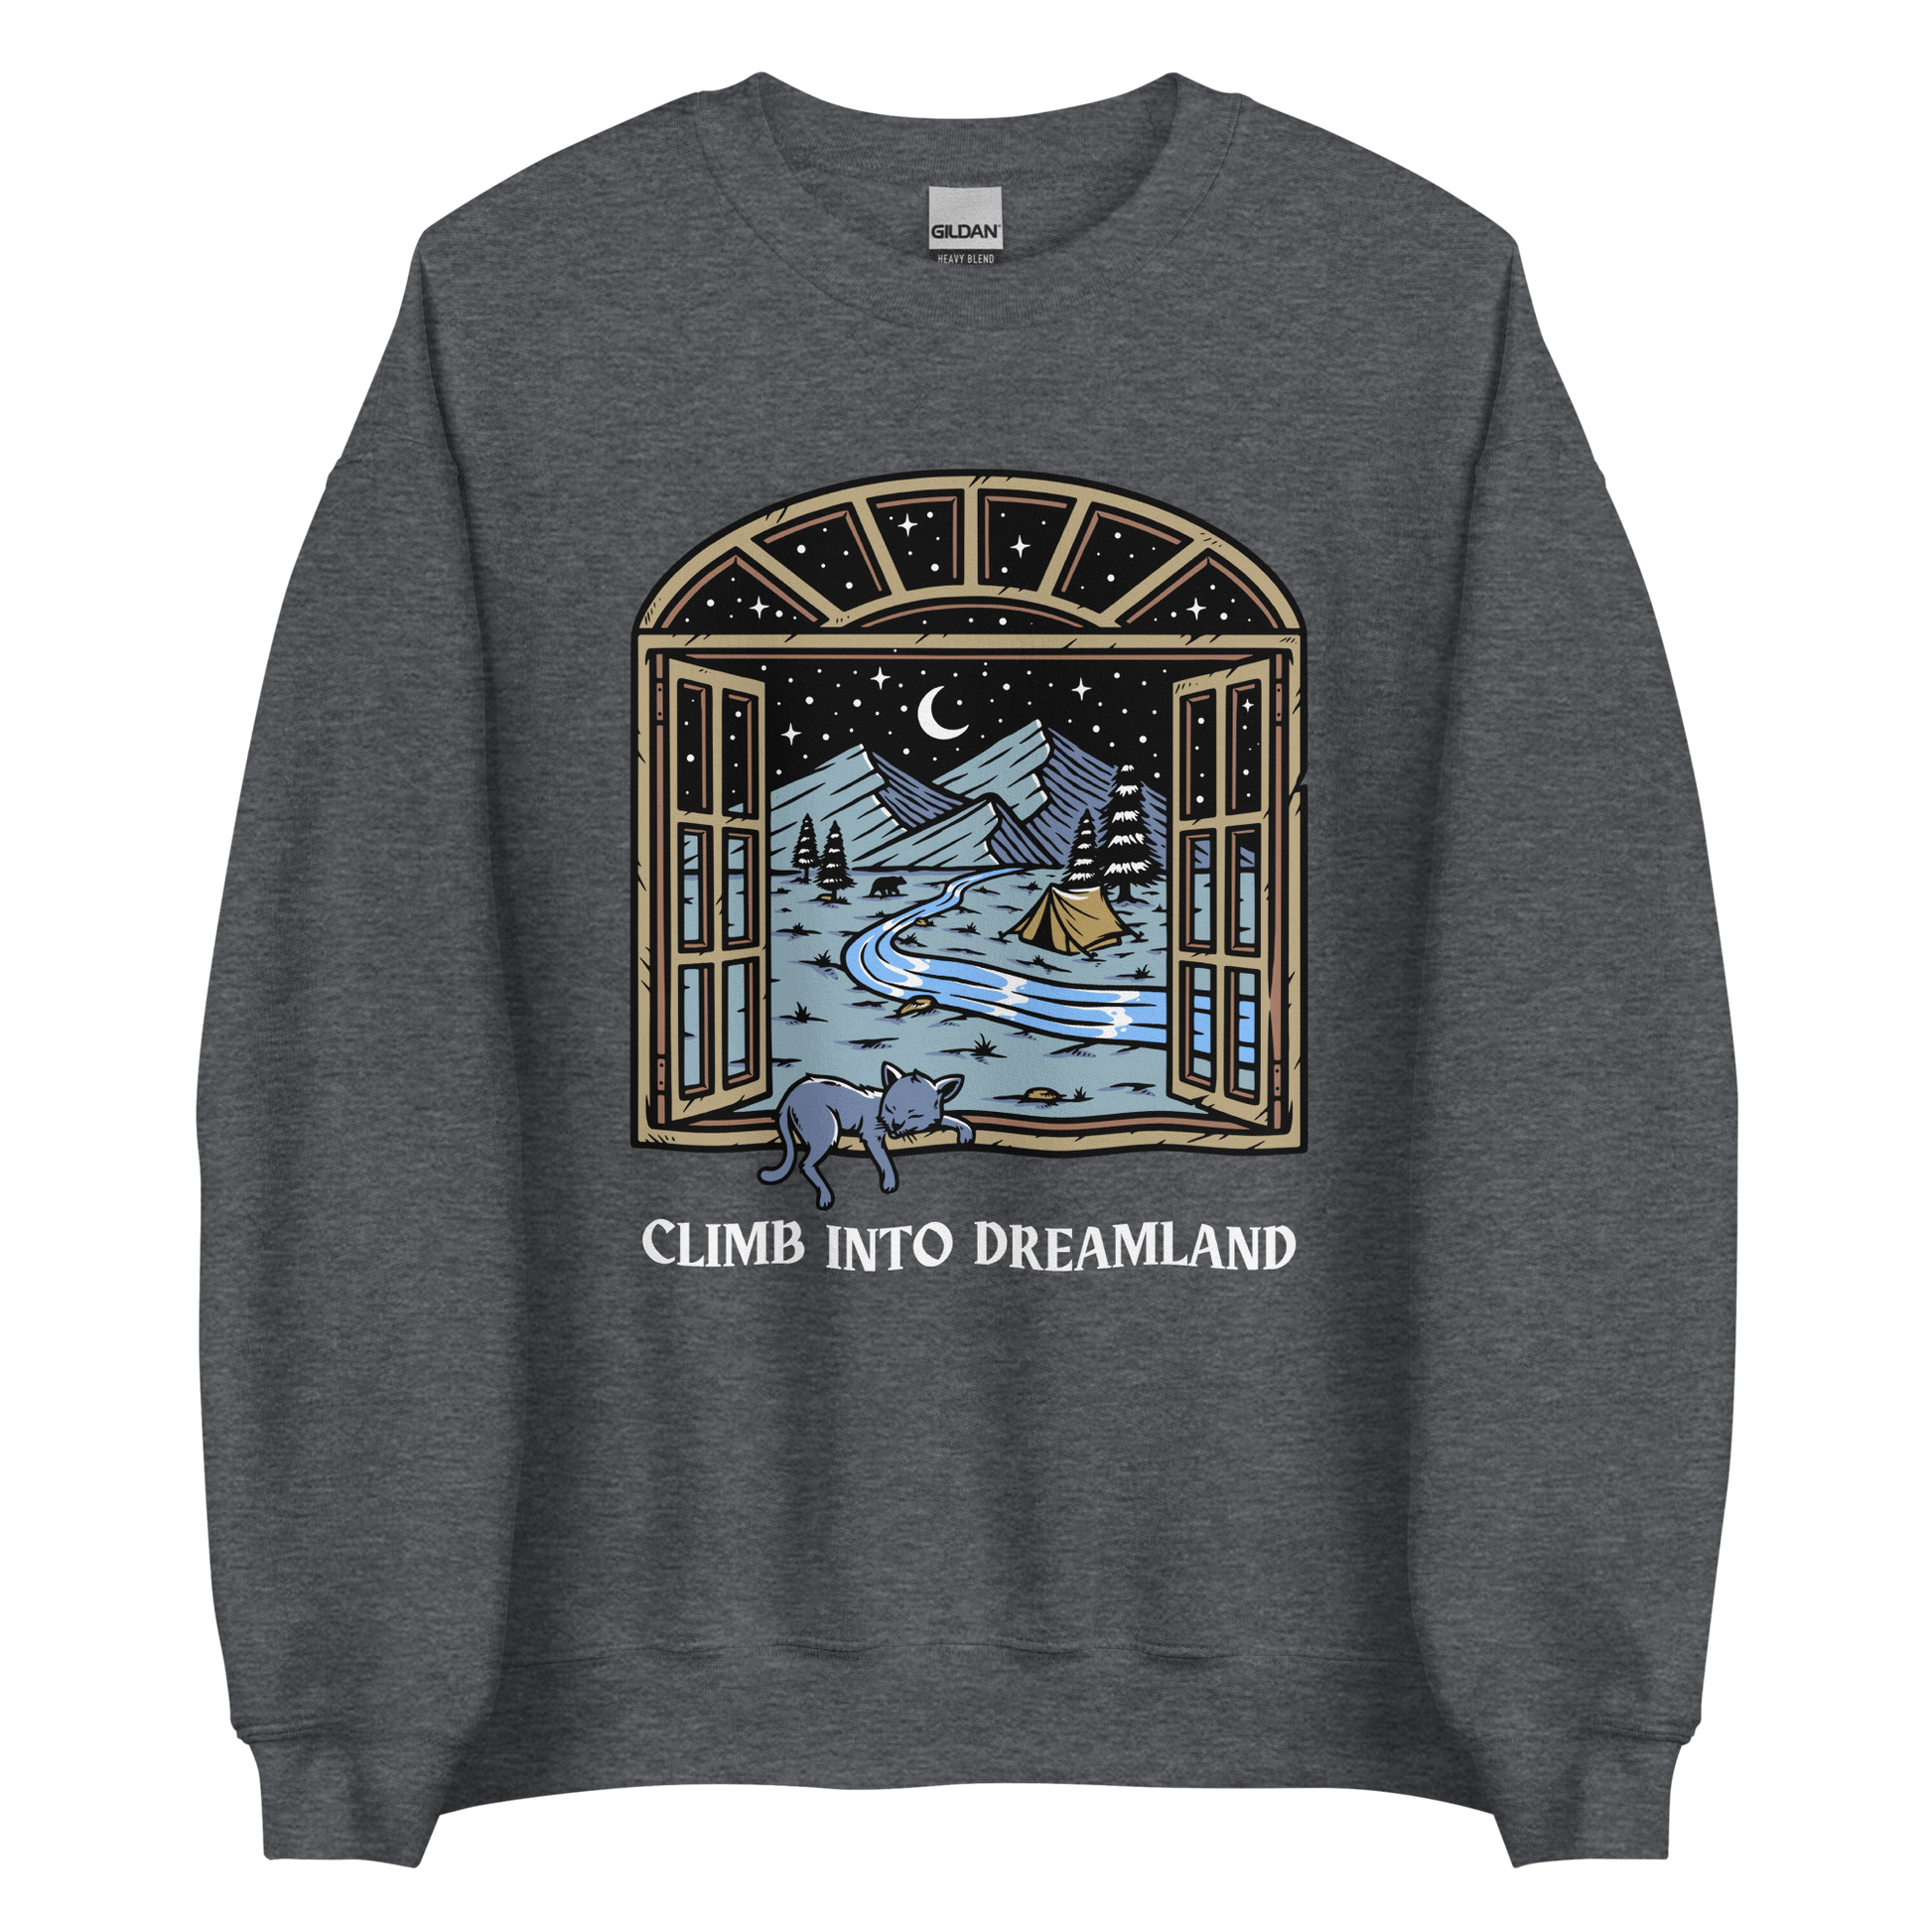 Dark Heather Climb Into Dreamland Sweatshirt featuring a mesmerizing mountain view graphic on the chest - Cool Graphic Nature Sweatshirts - Boozy Fox